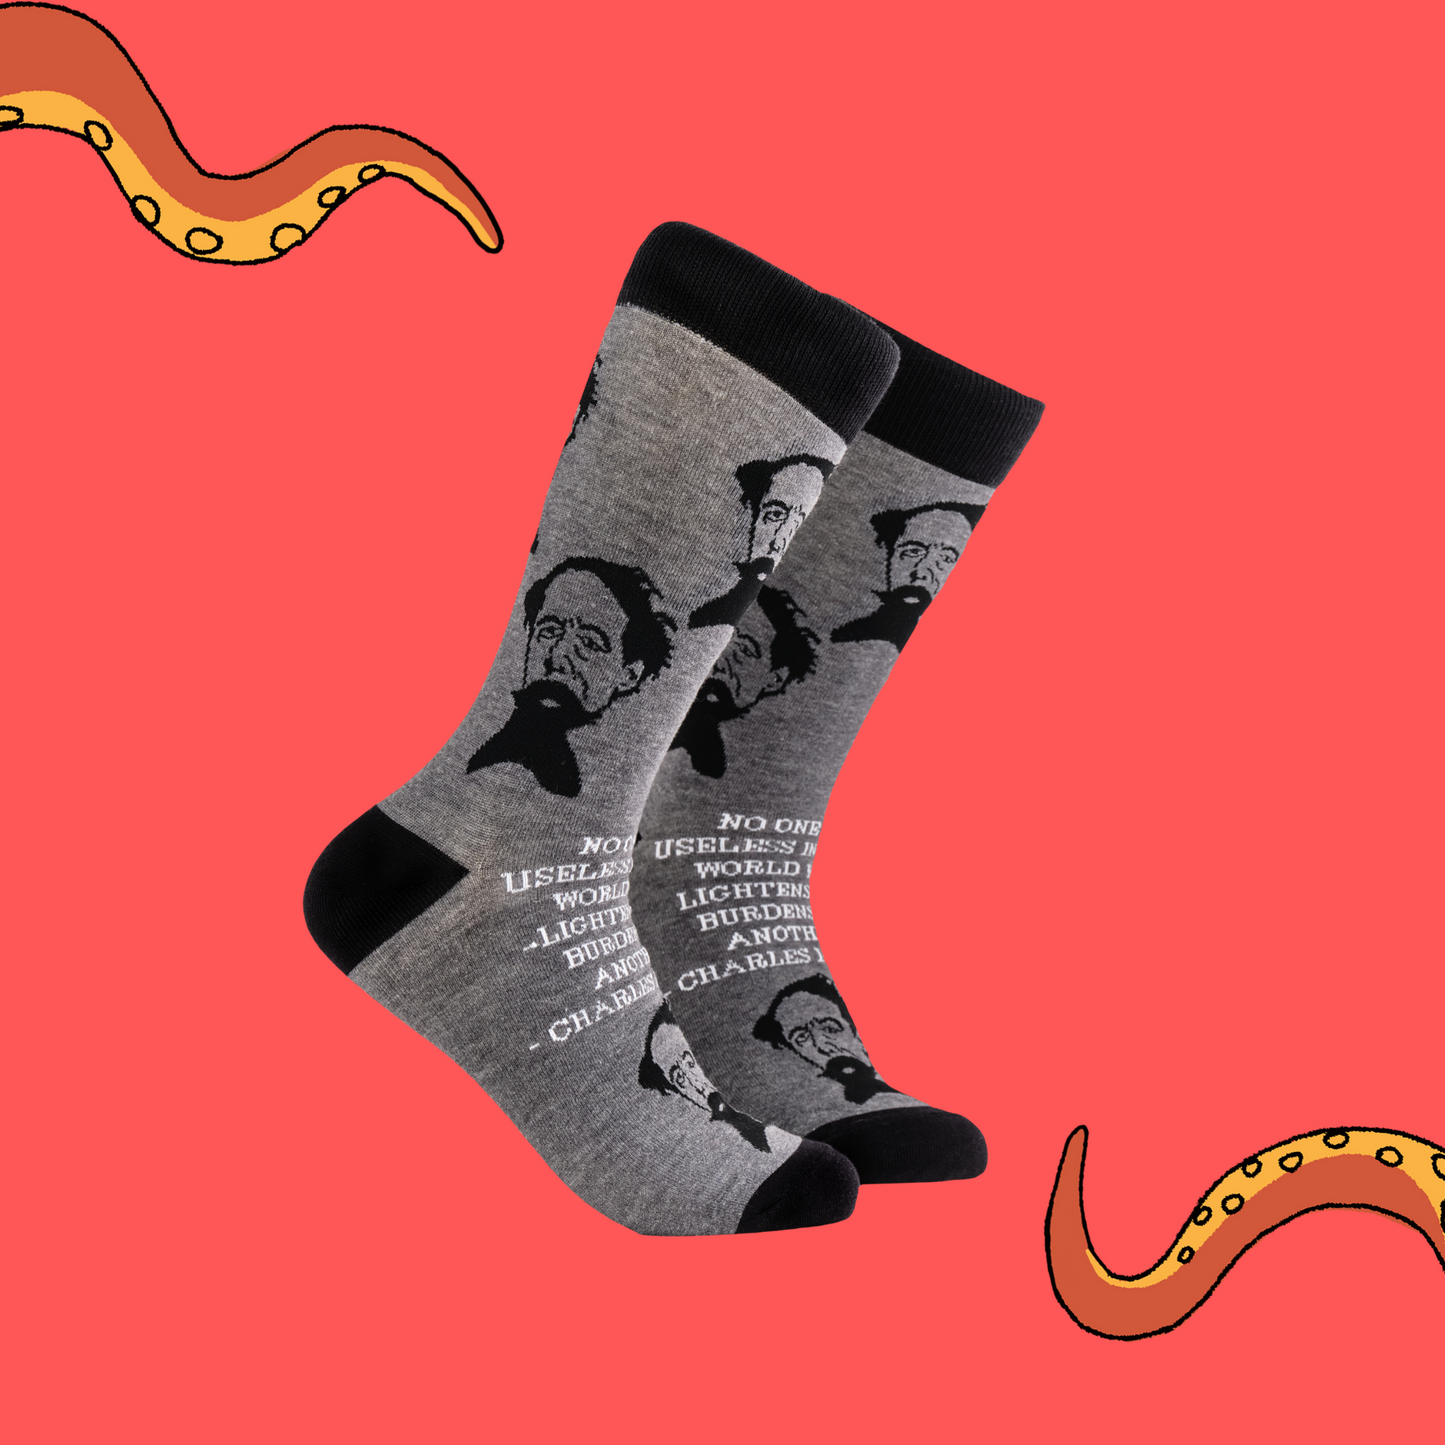 A pair of socks depicting Charles Dickens and a quote. Grey legs, black cuff, heel and toe.